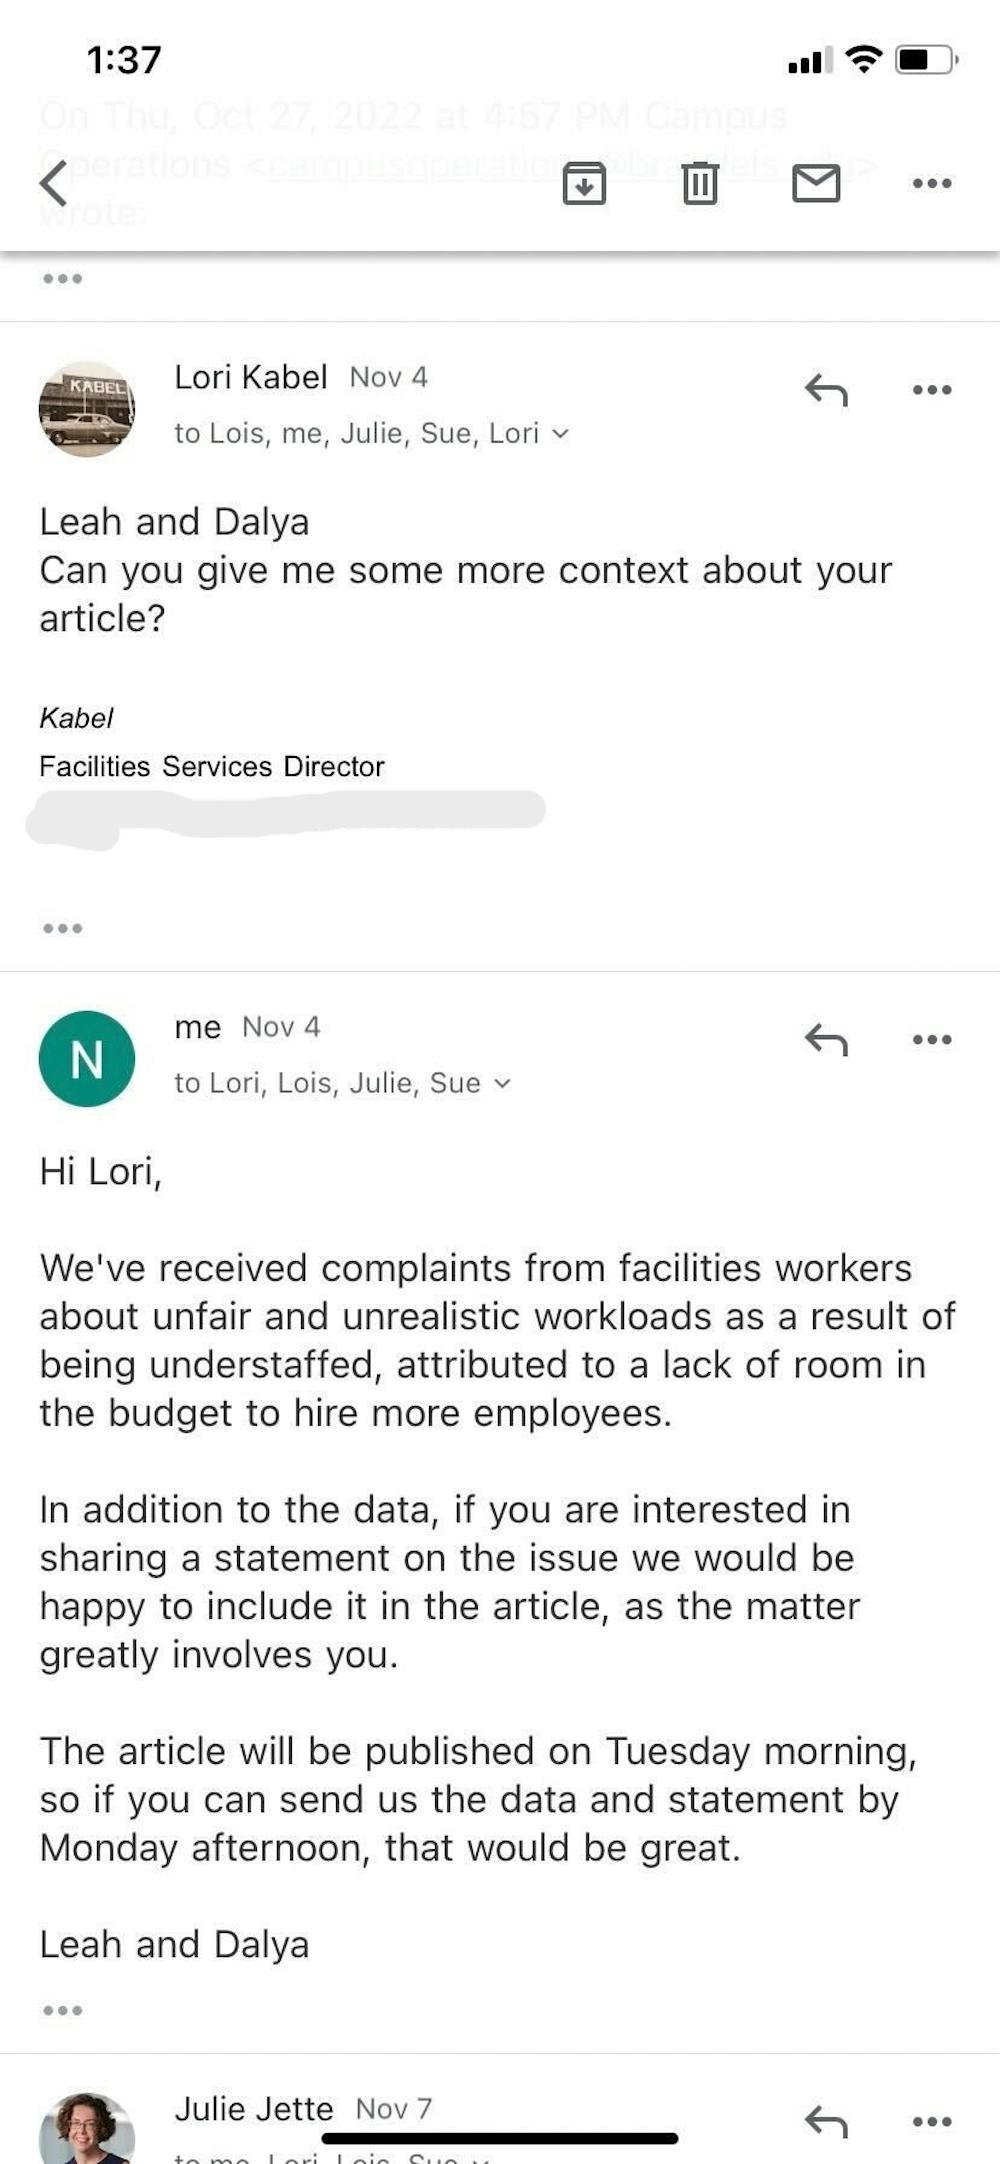 EMAIL: The Justice News editors emailed Lori Kabel regaring the complaints from facilities
workers.